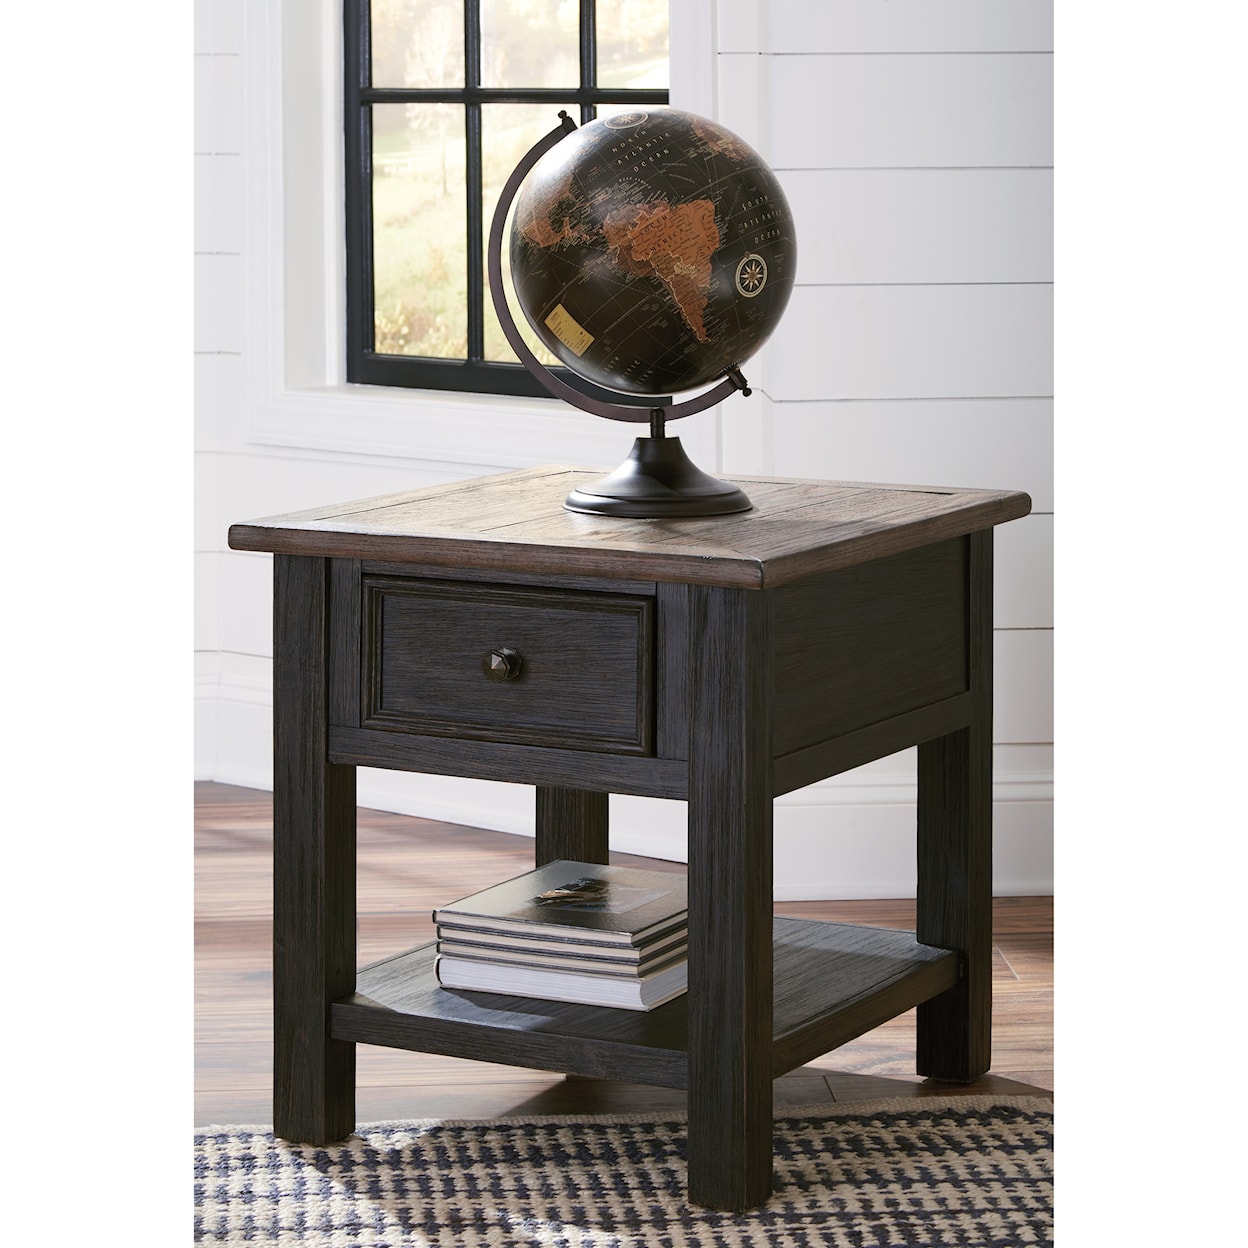 Signature Design by Ashley Furniture Tyler Creek Rectangular End Table